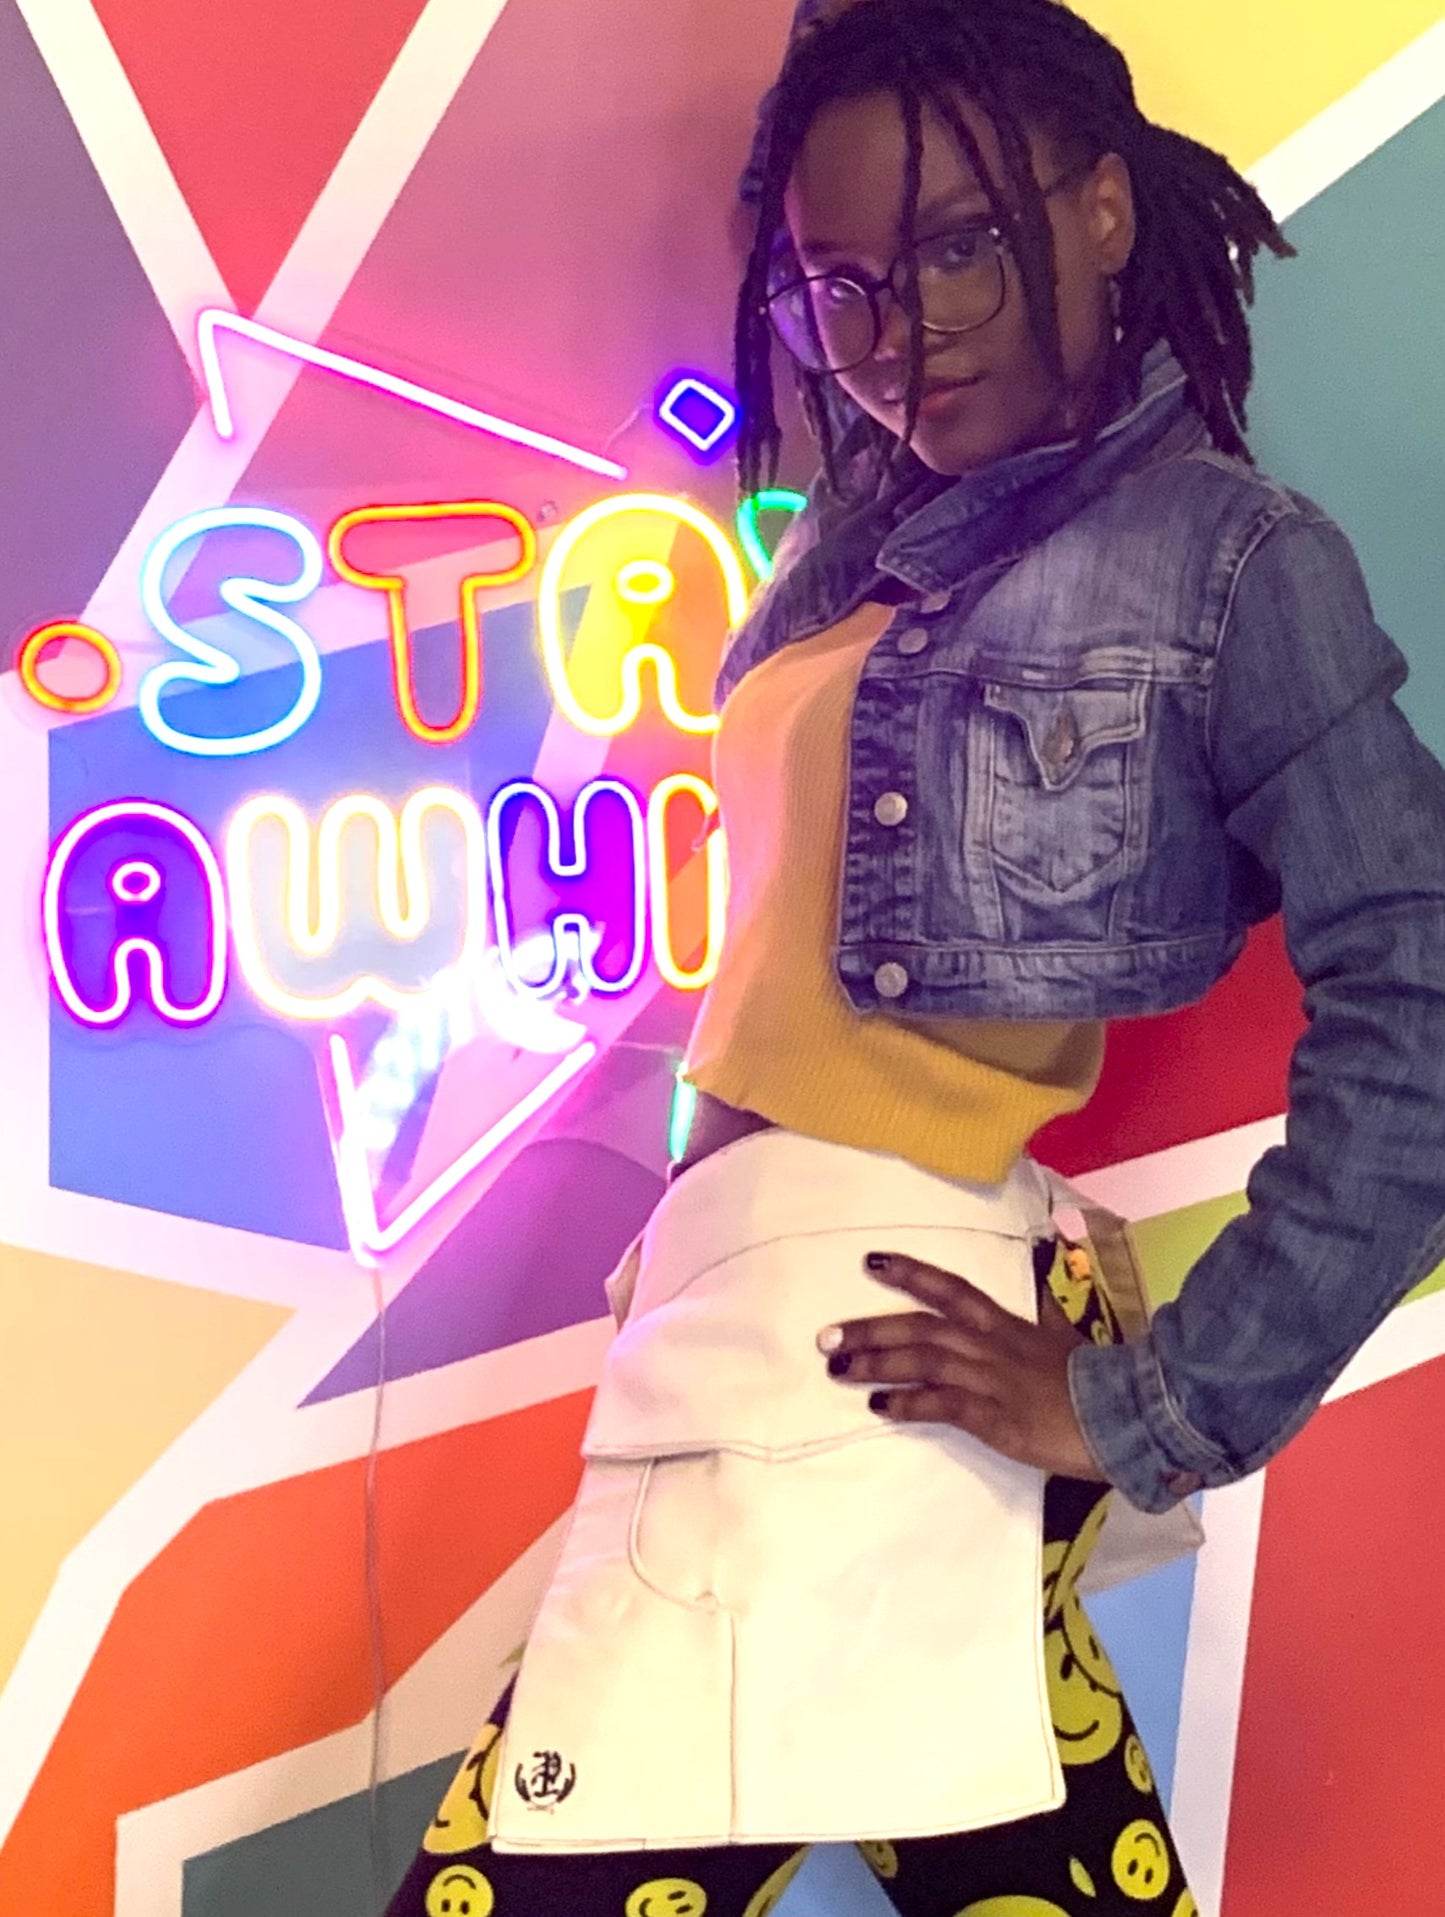 A young woman wearing a pair of off-white pockets with her hands on her hips, standing in front of a neon sign saying "stay awhile" amid a colorful background